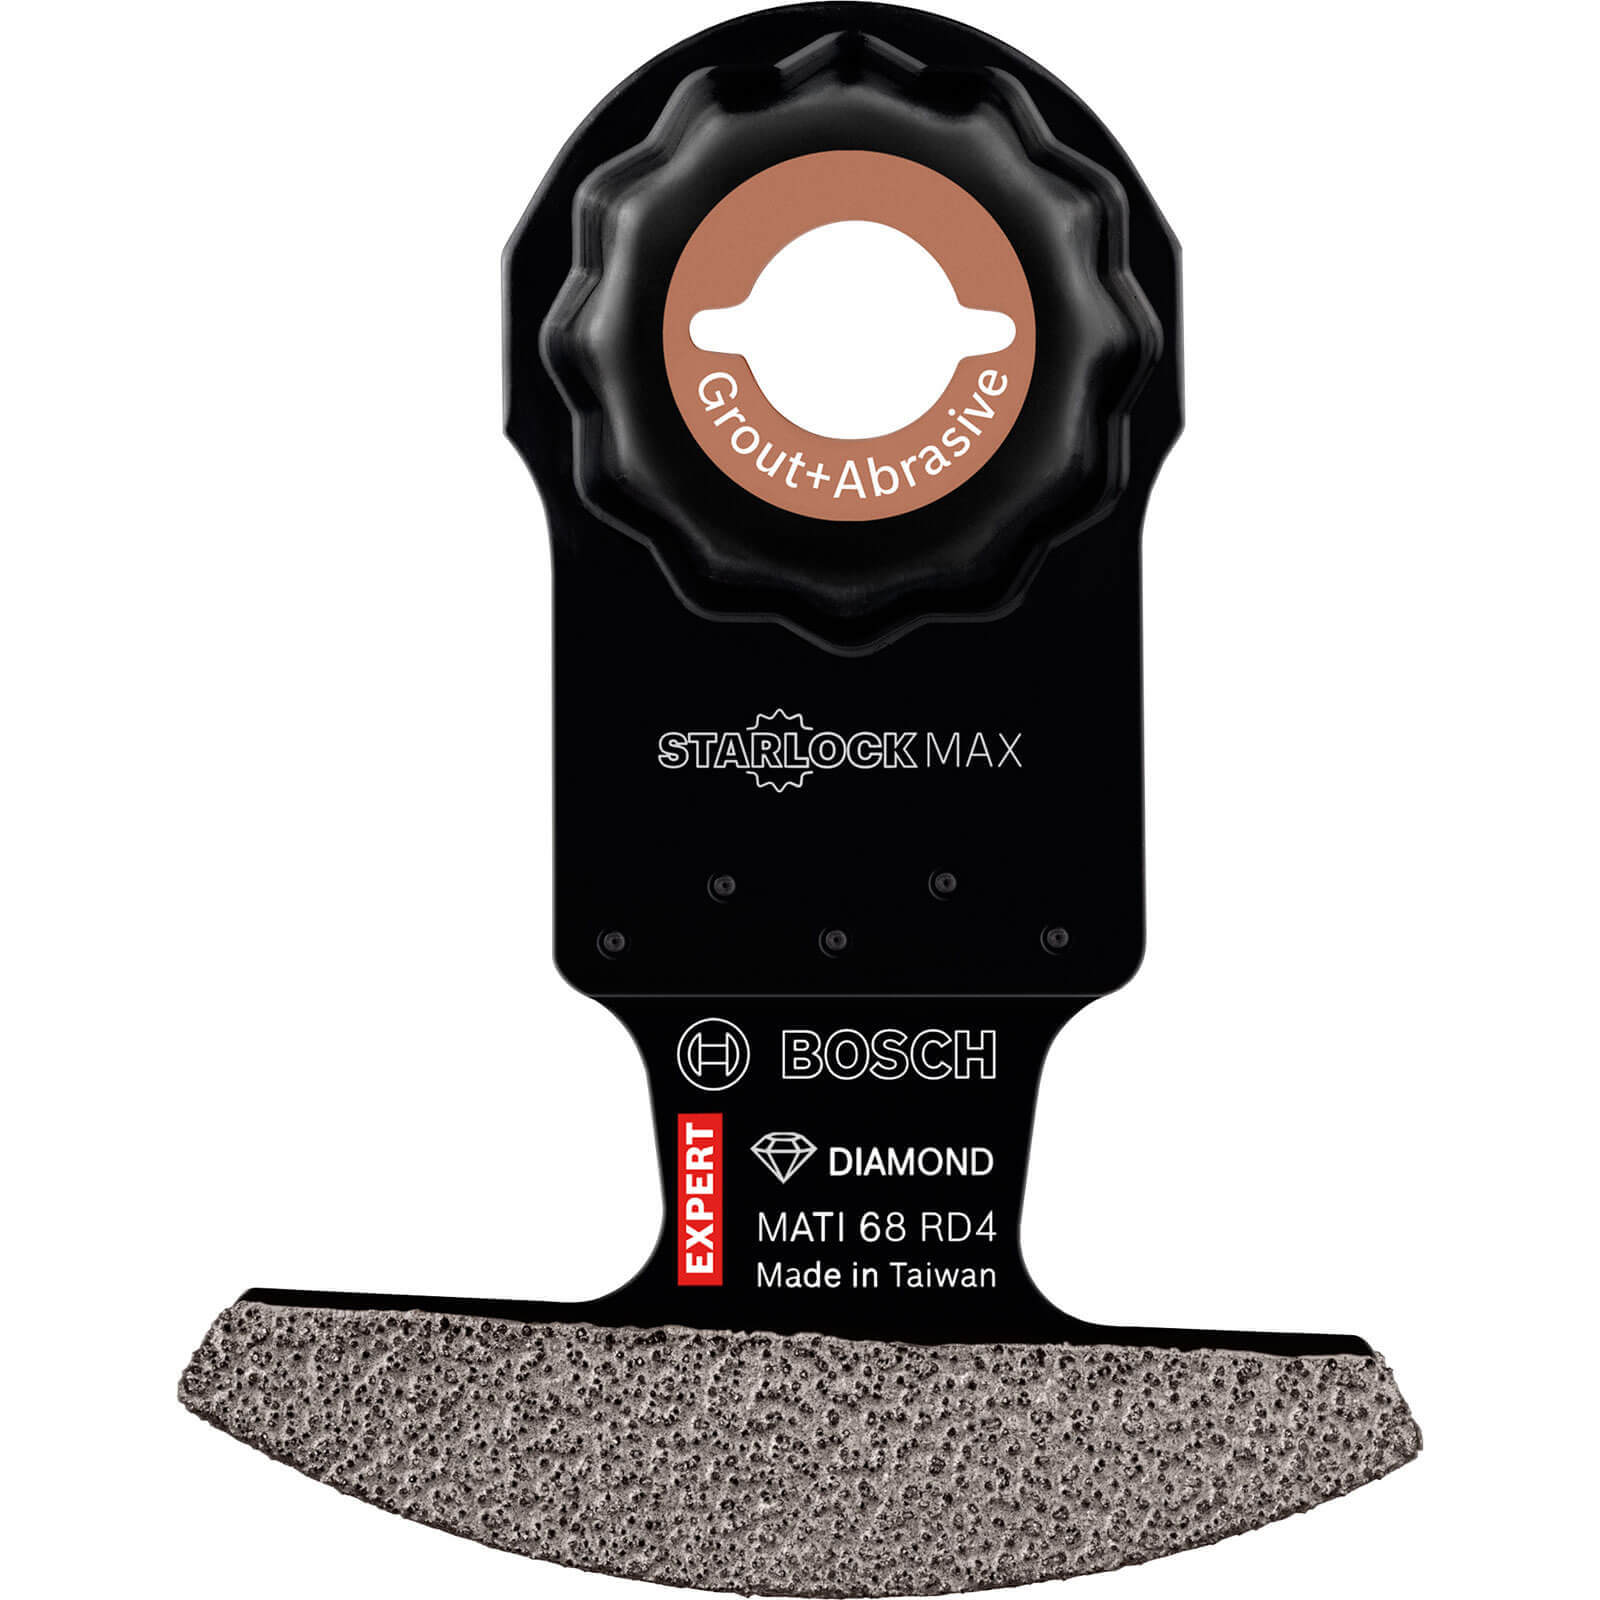 Bosch Expert MATI 68 RD4 Abrasive and Grout Starlock Max Oscillating Multi Tool Segment Saw Blade 68mm Pack of 1